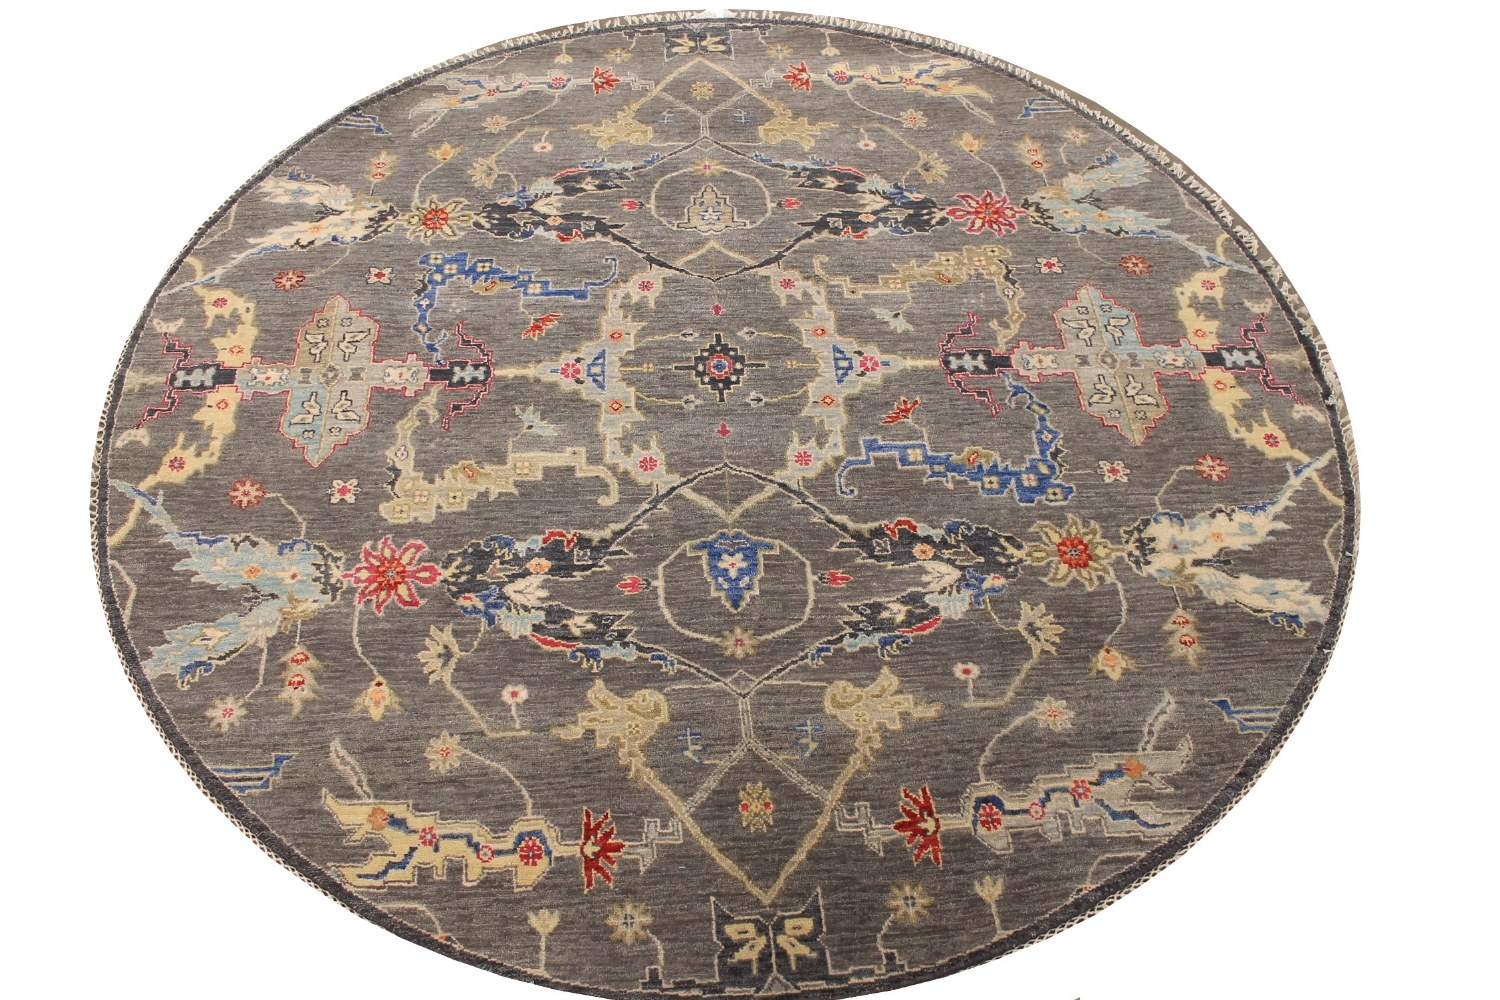 6 ft. - 7 ft. Round & Square Traditional Hand Knotted Wool Area Rug - MR026244